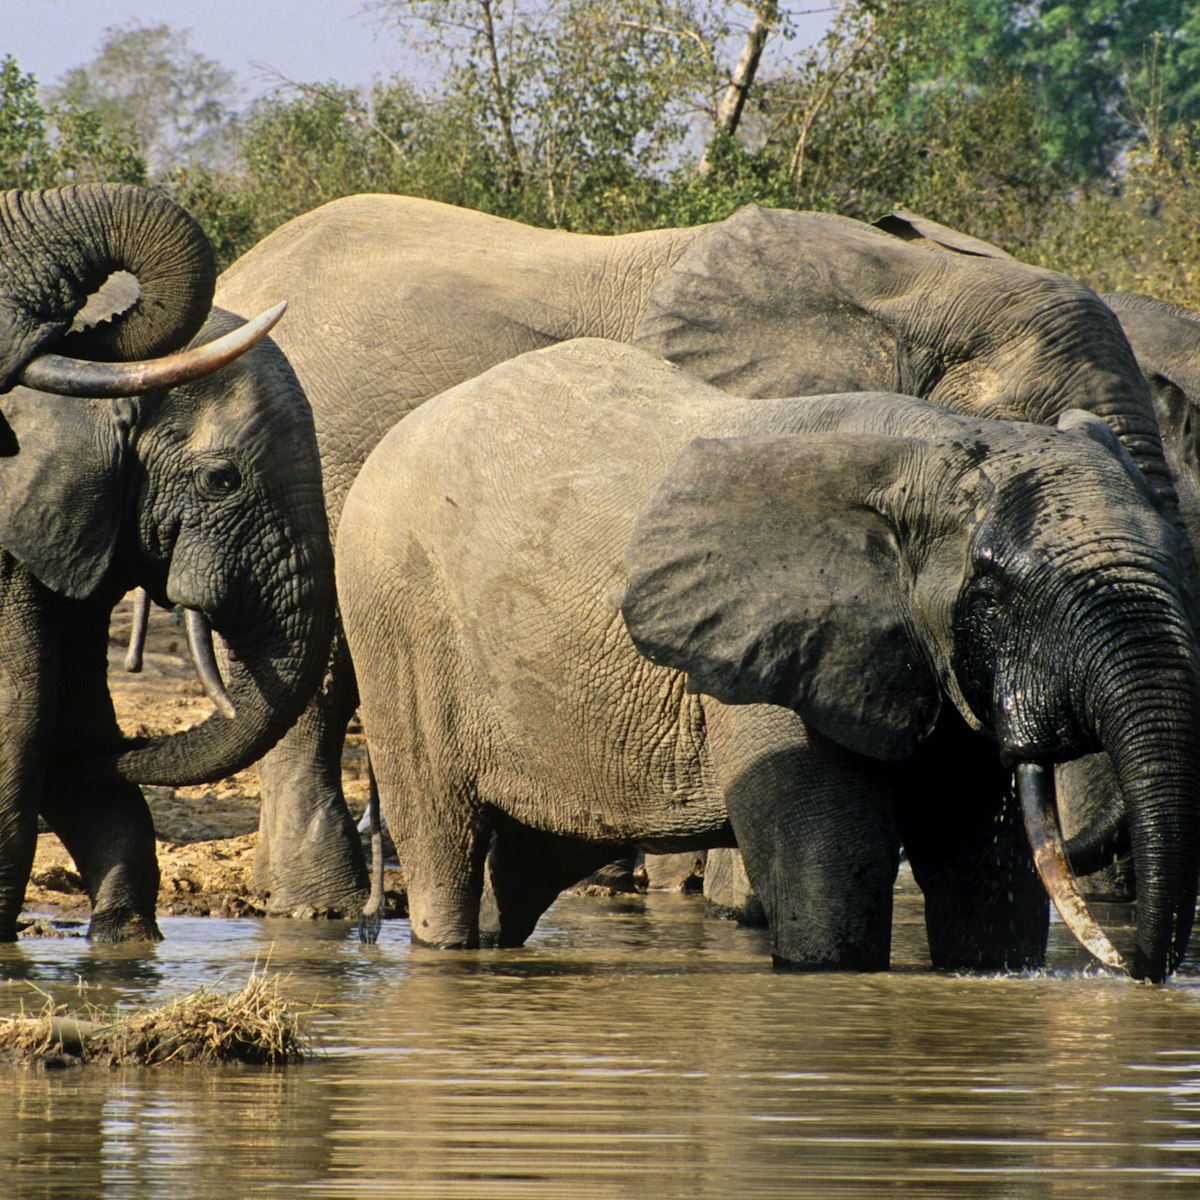 Ghana, Northern region, Mole National Park. Elephants in Mole National Park drinking at water hole.